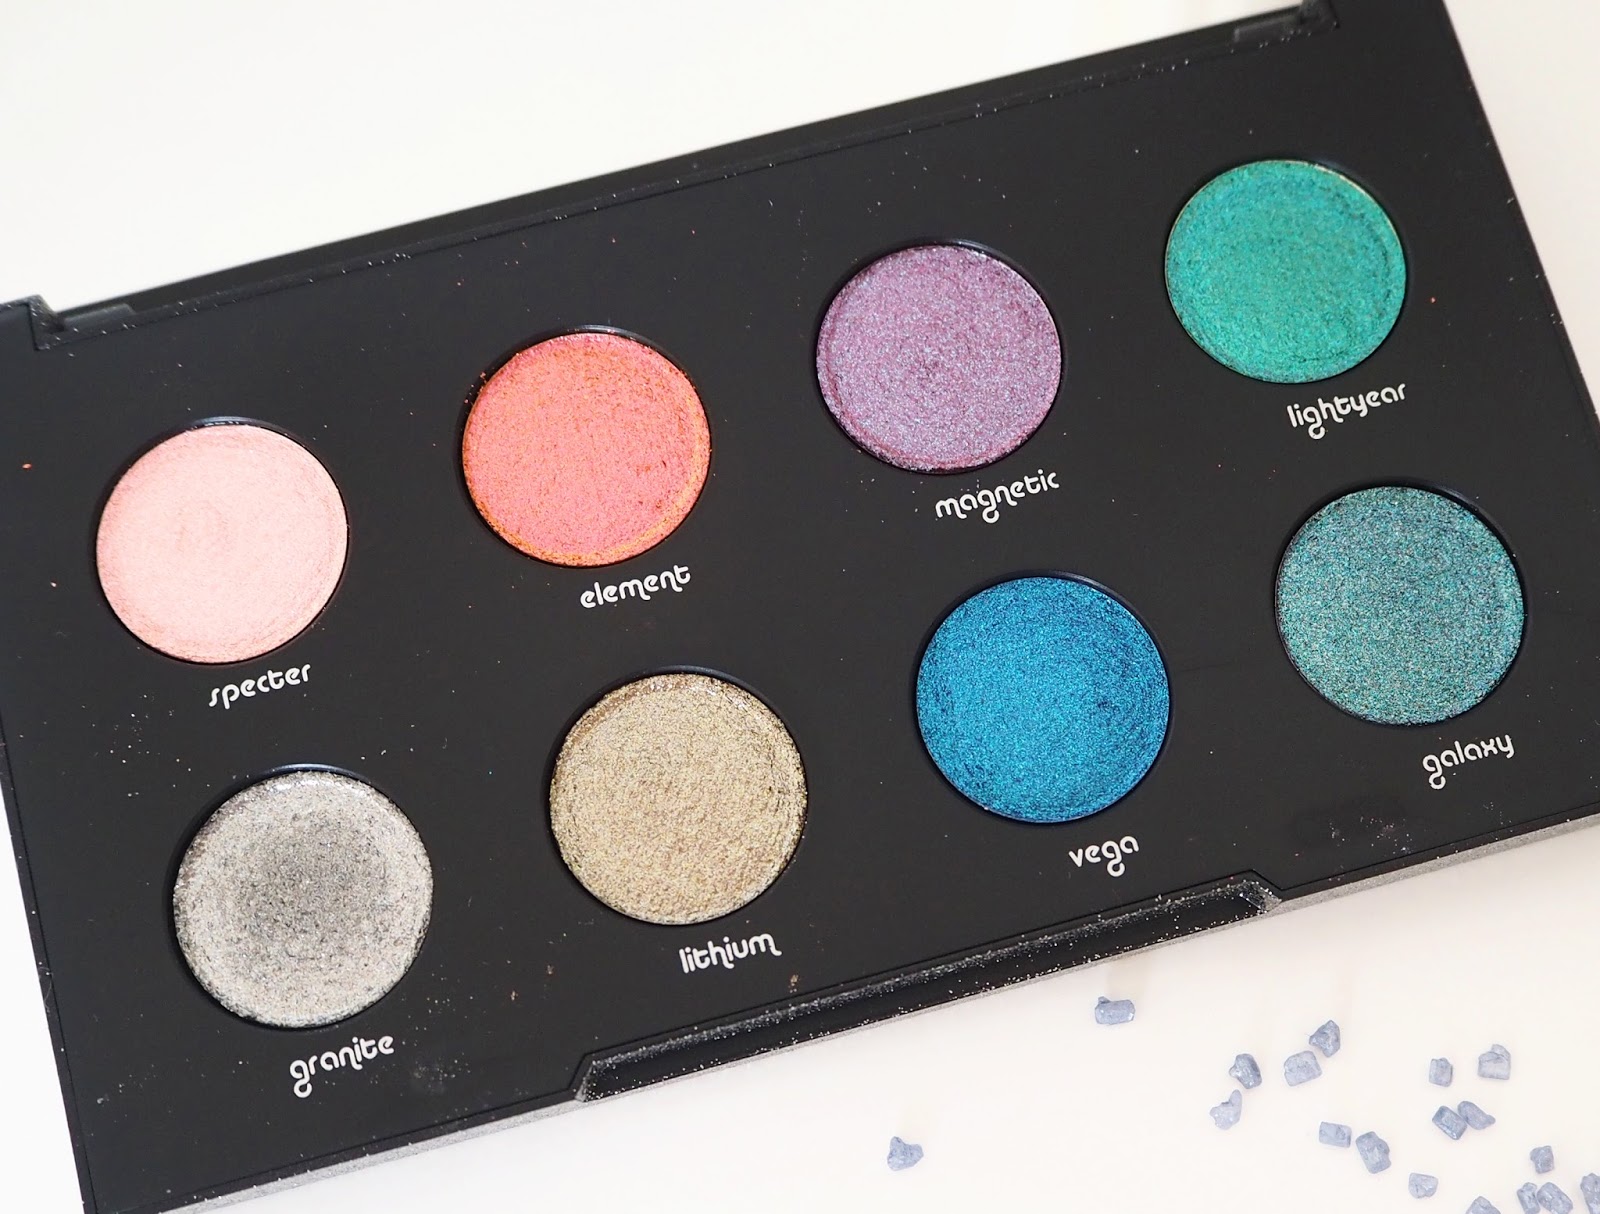 Urban Decay Moondust Palette, Swatches, Beauty Blogger, Urban Decay Review, Eye Shadow Swatches, Make Up Blogger, Make Up Review, Make Up Palette, Eye Shadow Palette, UK Blogger, 